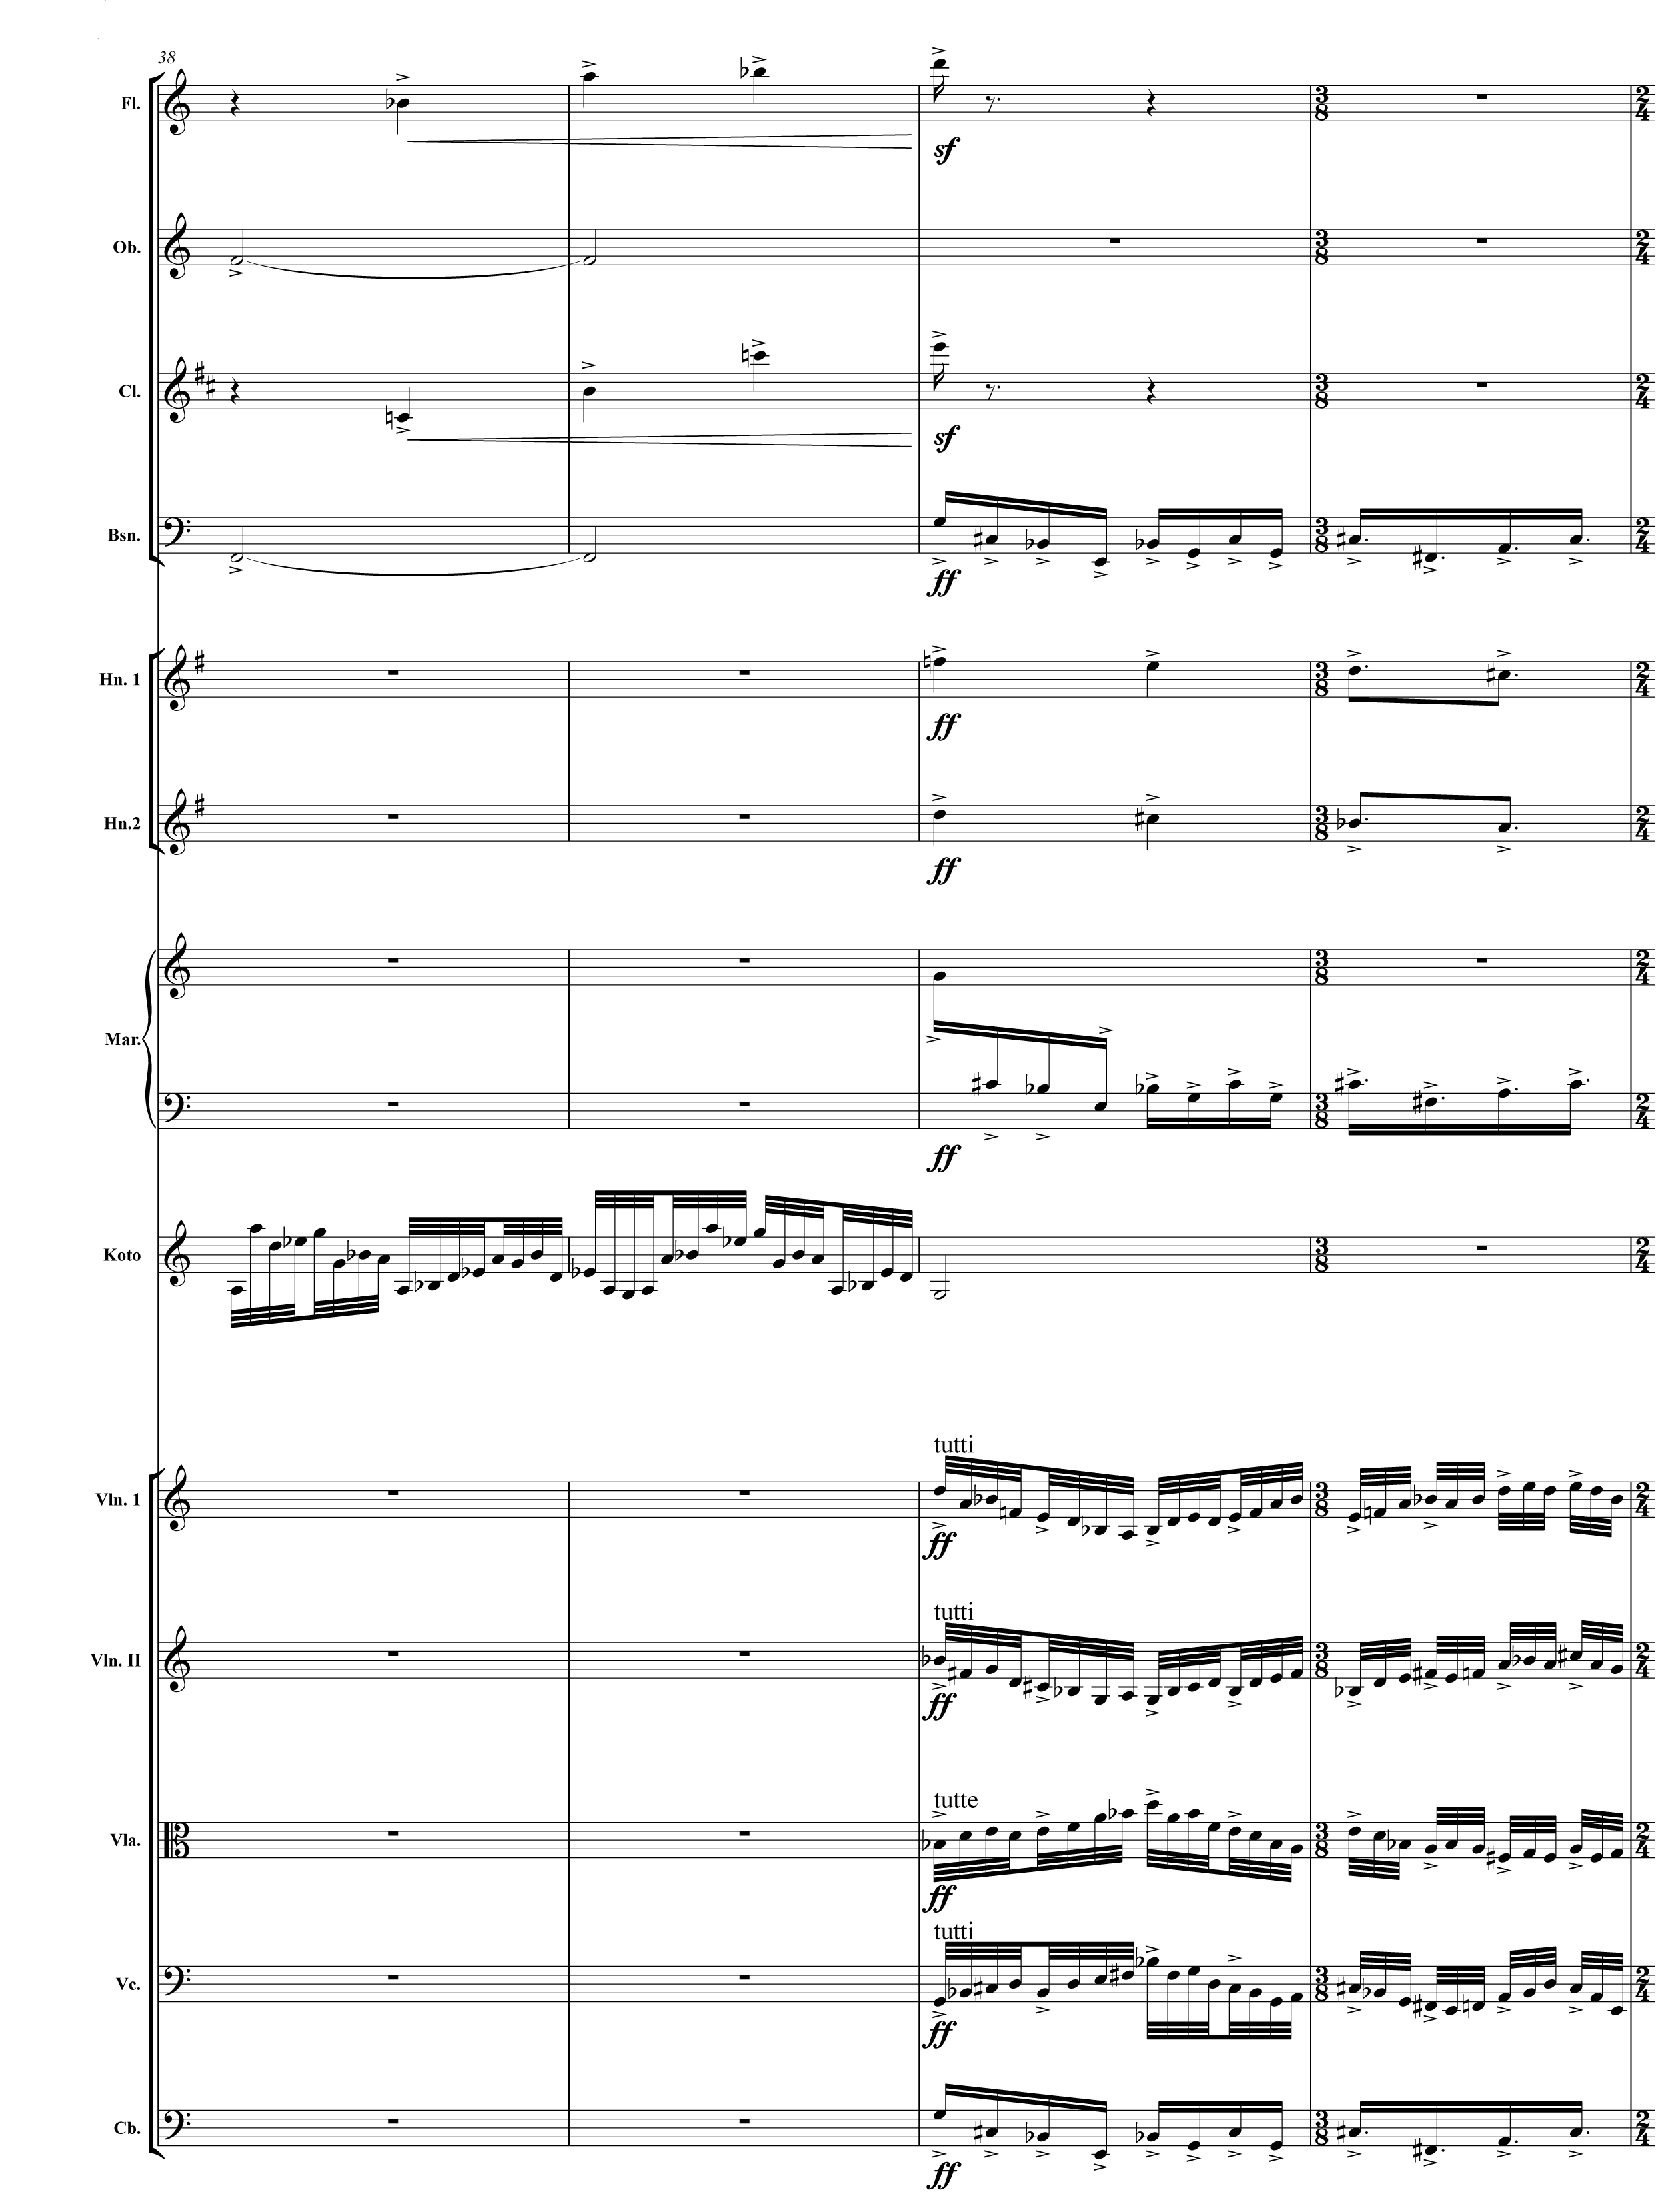 Music notation for orchestra.